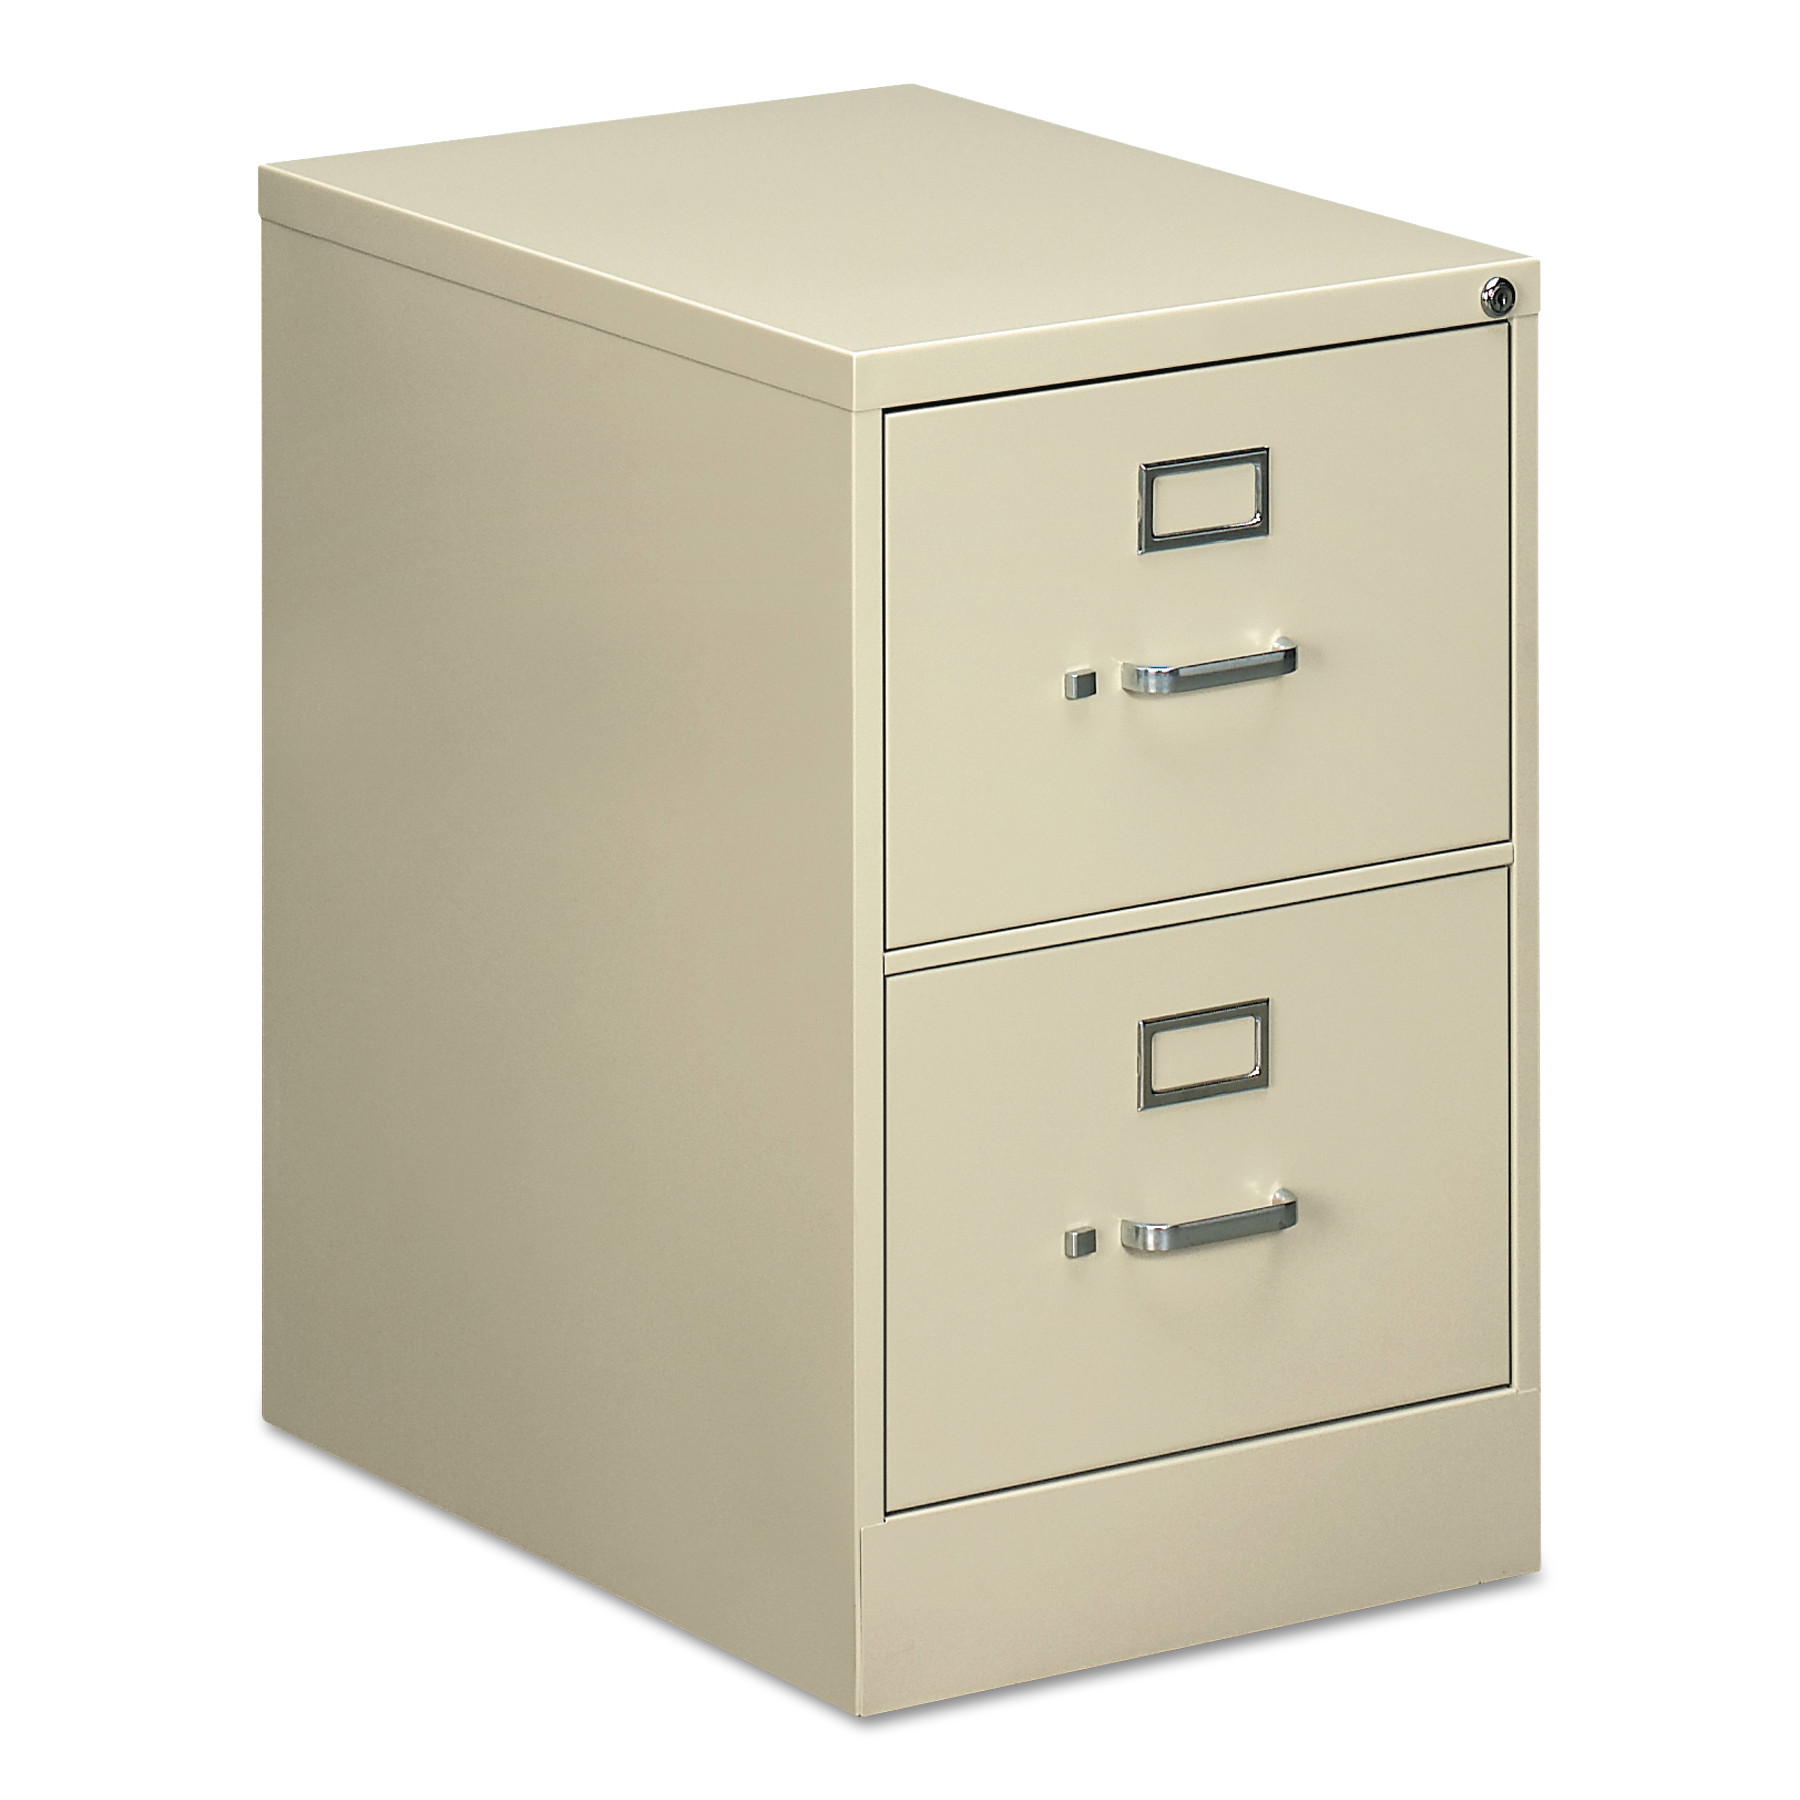 Two-Drawer Economy Vertical File, Legal, 18 1/4w x 26 1/2d x 29h, Putty